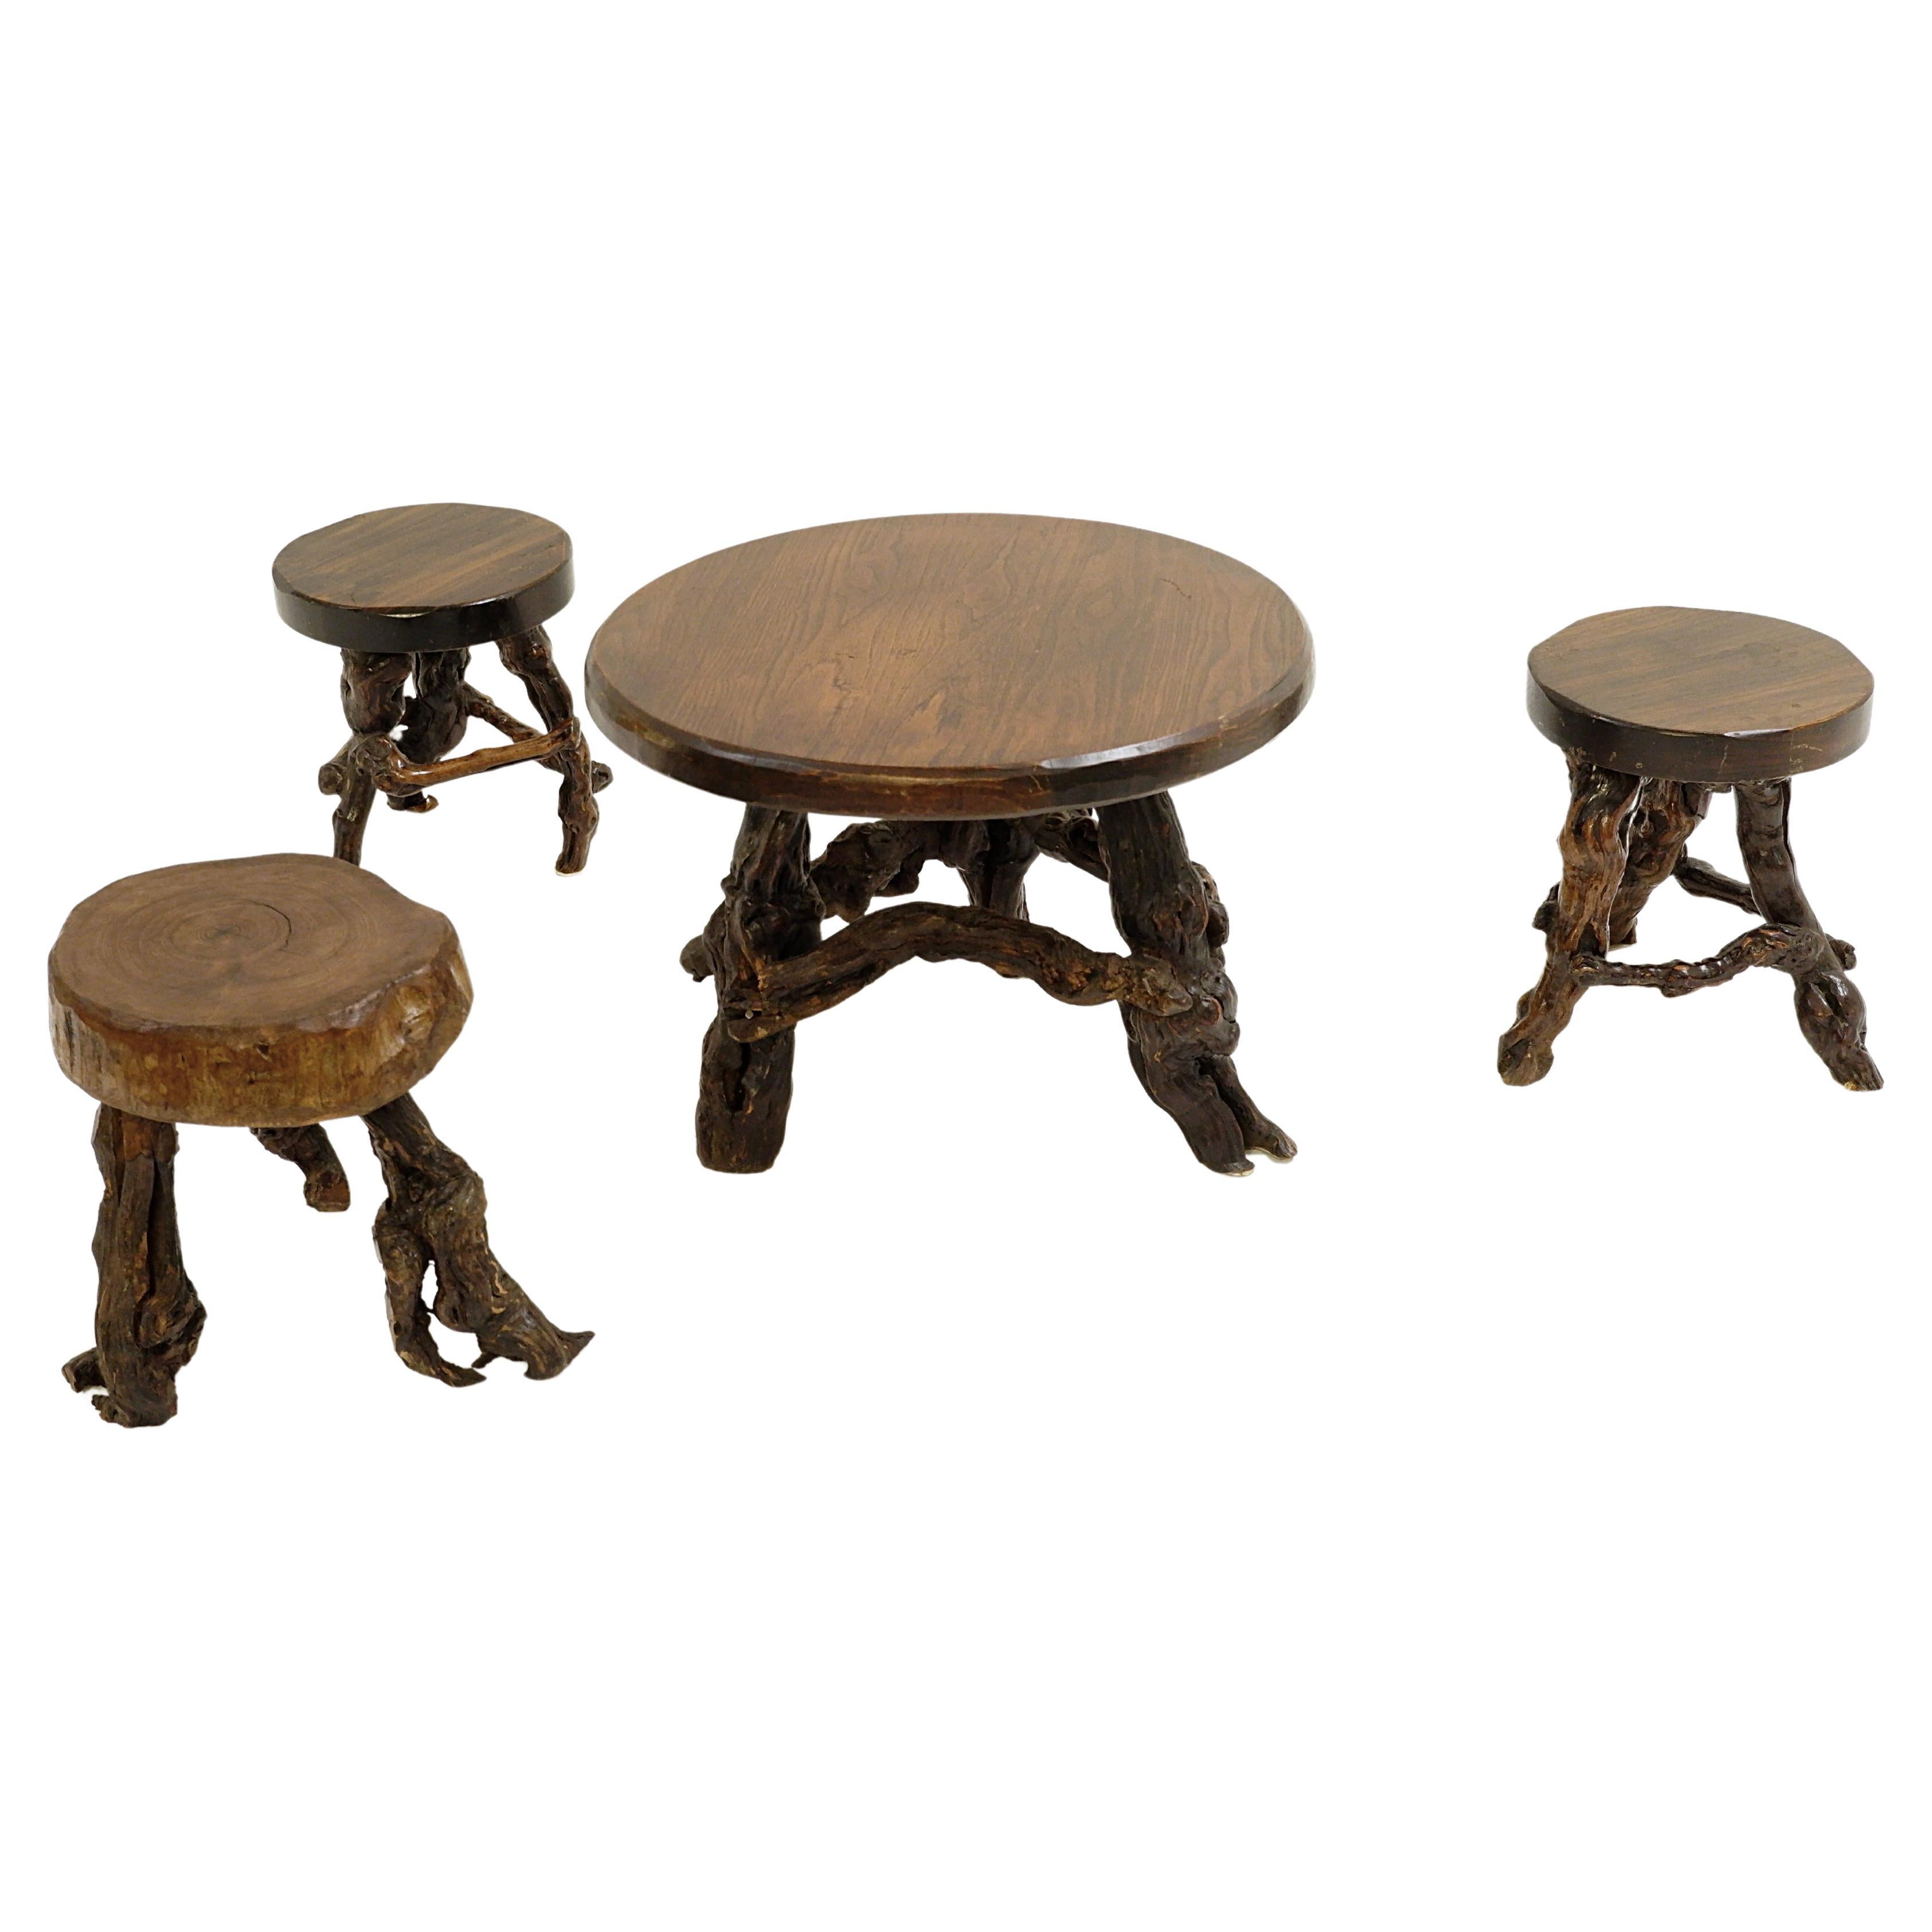 Primitive Set Tabls/Stools with Round Slab Seat and Legs Constructed from Vines